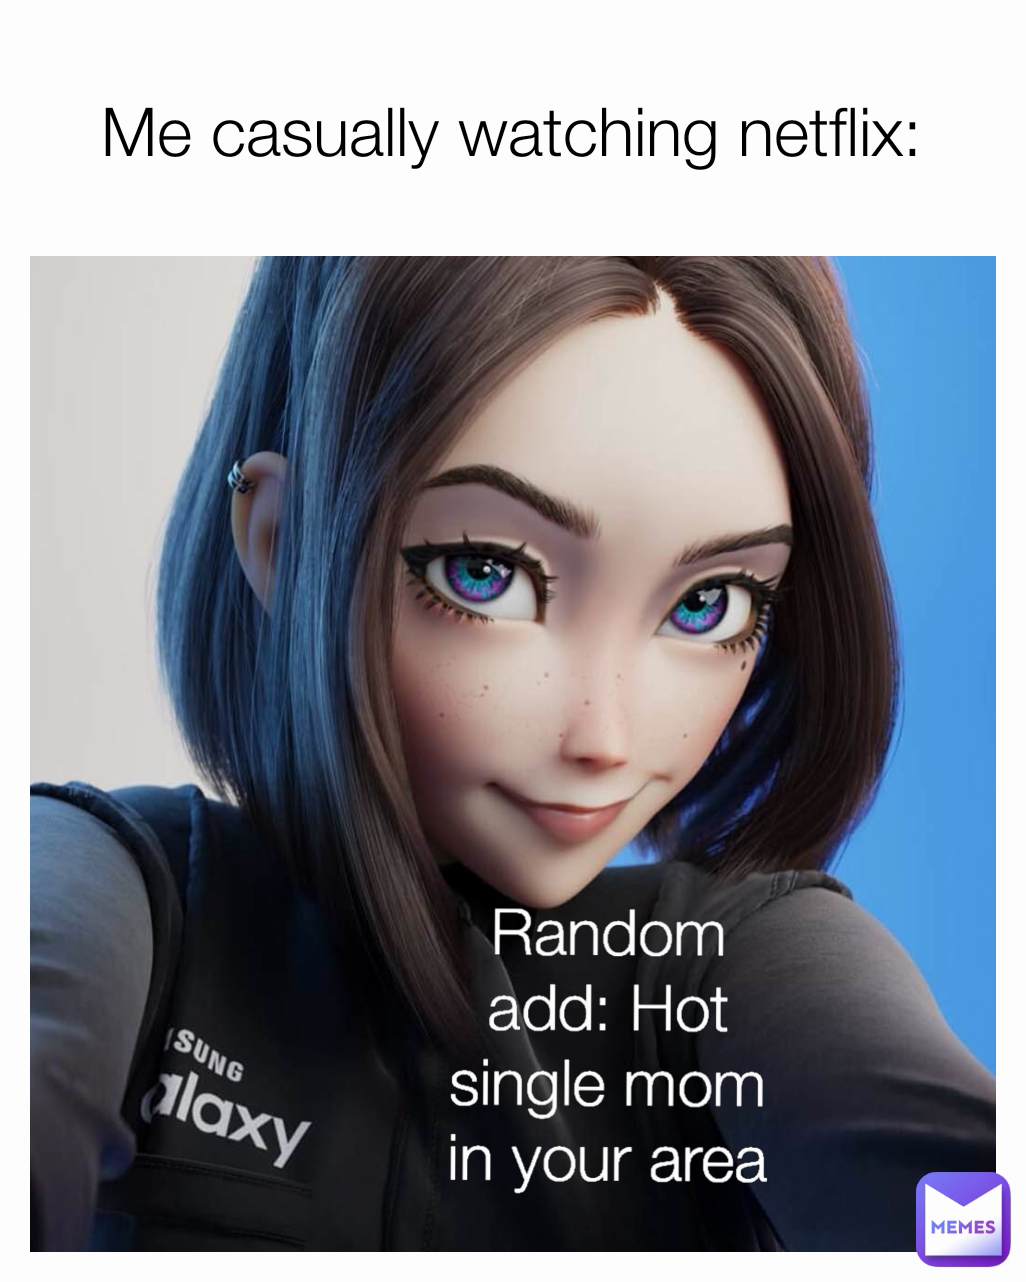 Me casually watching netflix: Random add: Hot single mom in your area